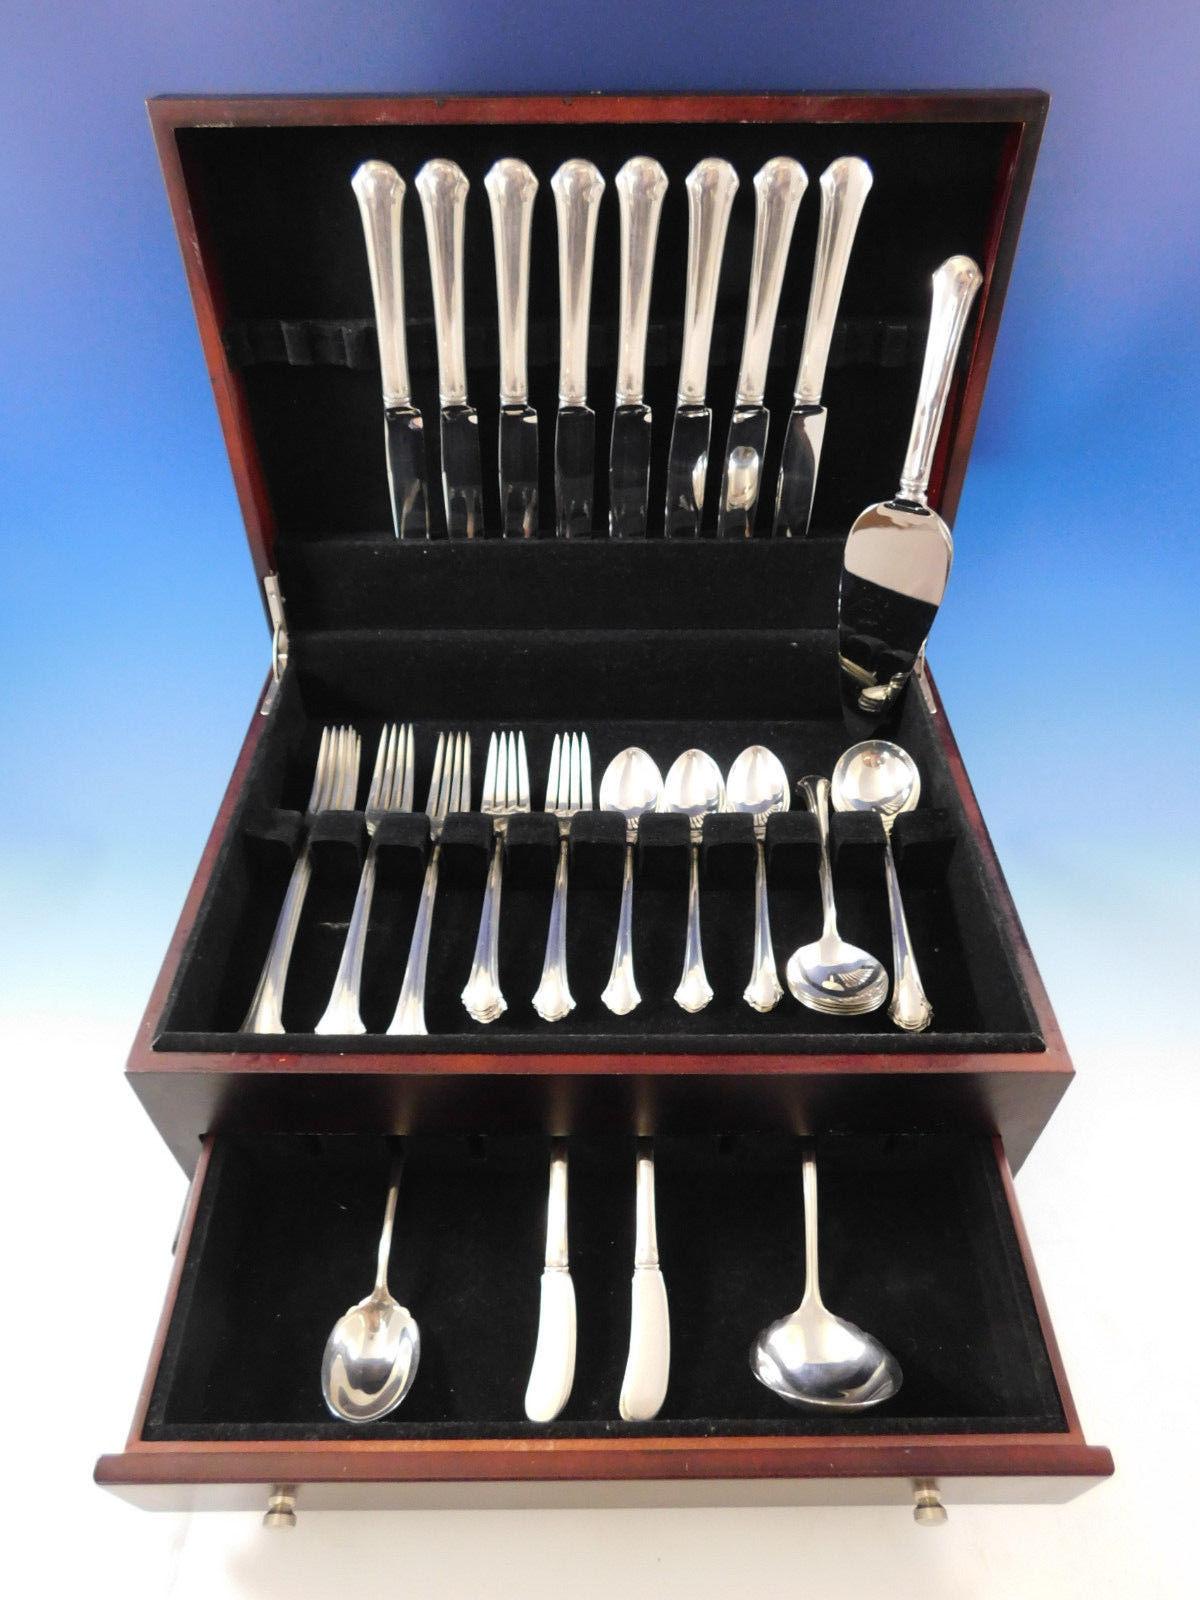 Dinner size Chippendale by Towle sterling silver flatware set - 51 pieces. This set includes:

Eight dinner size knives, 9 5/8